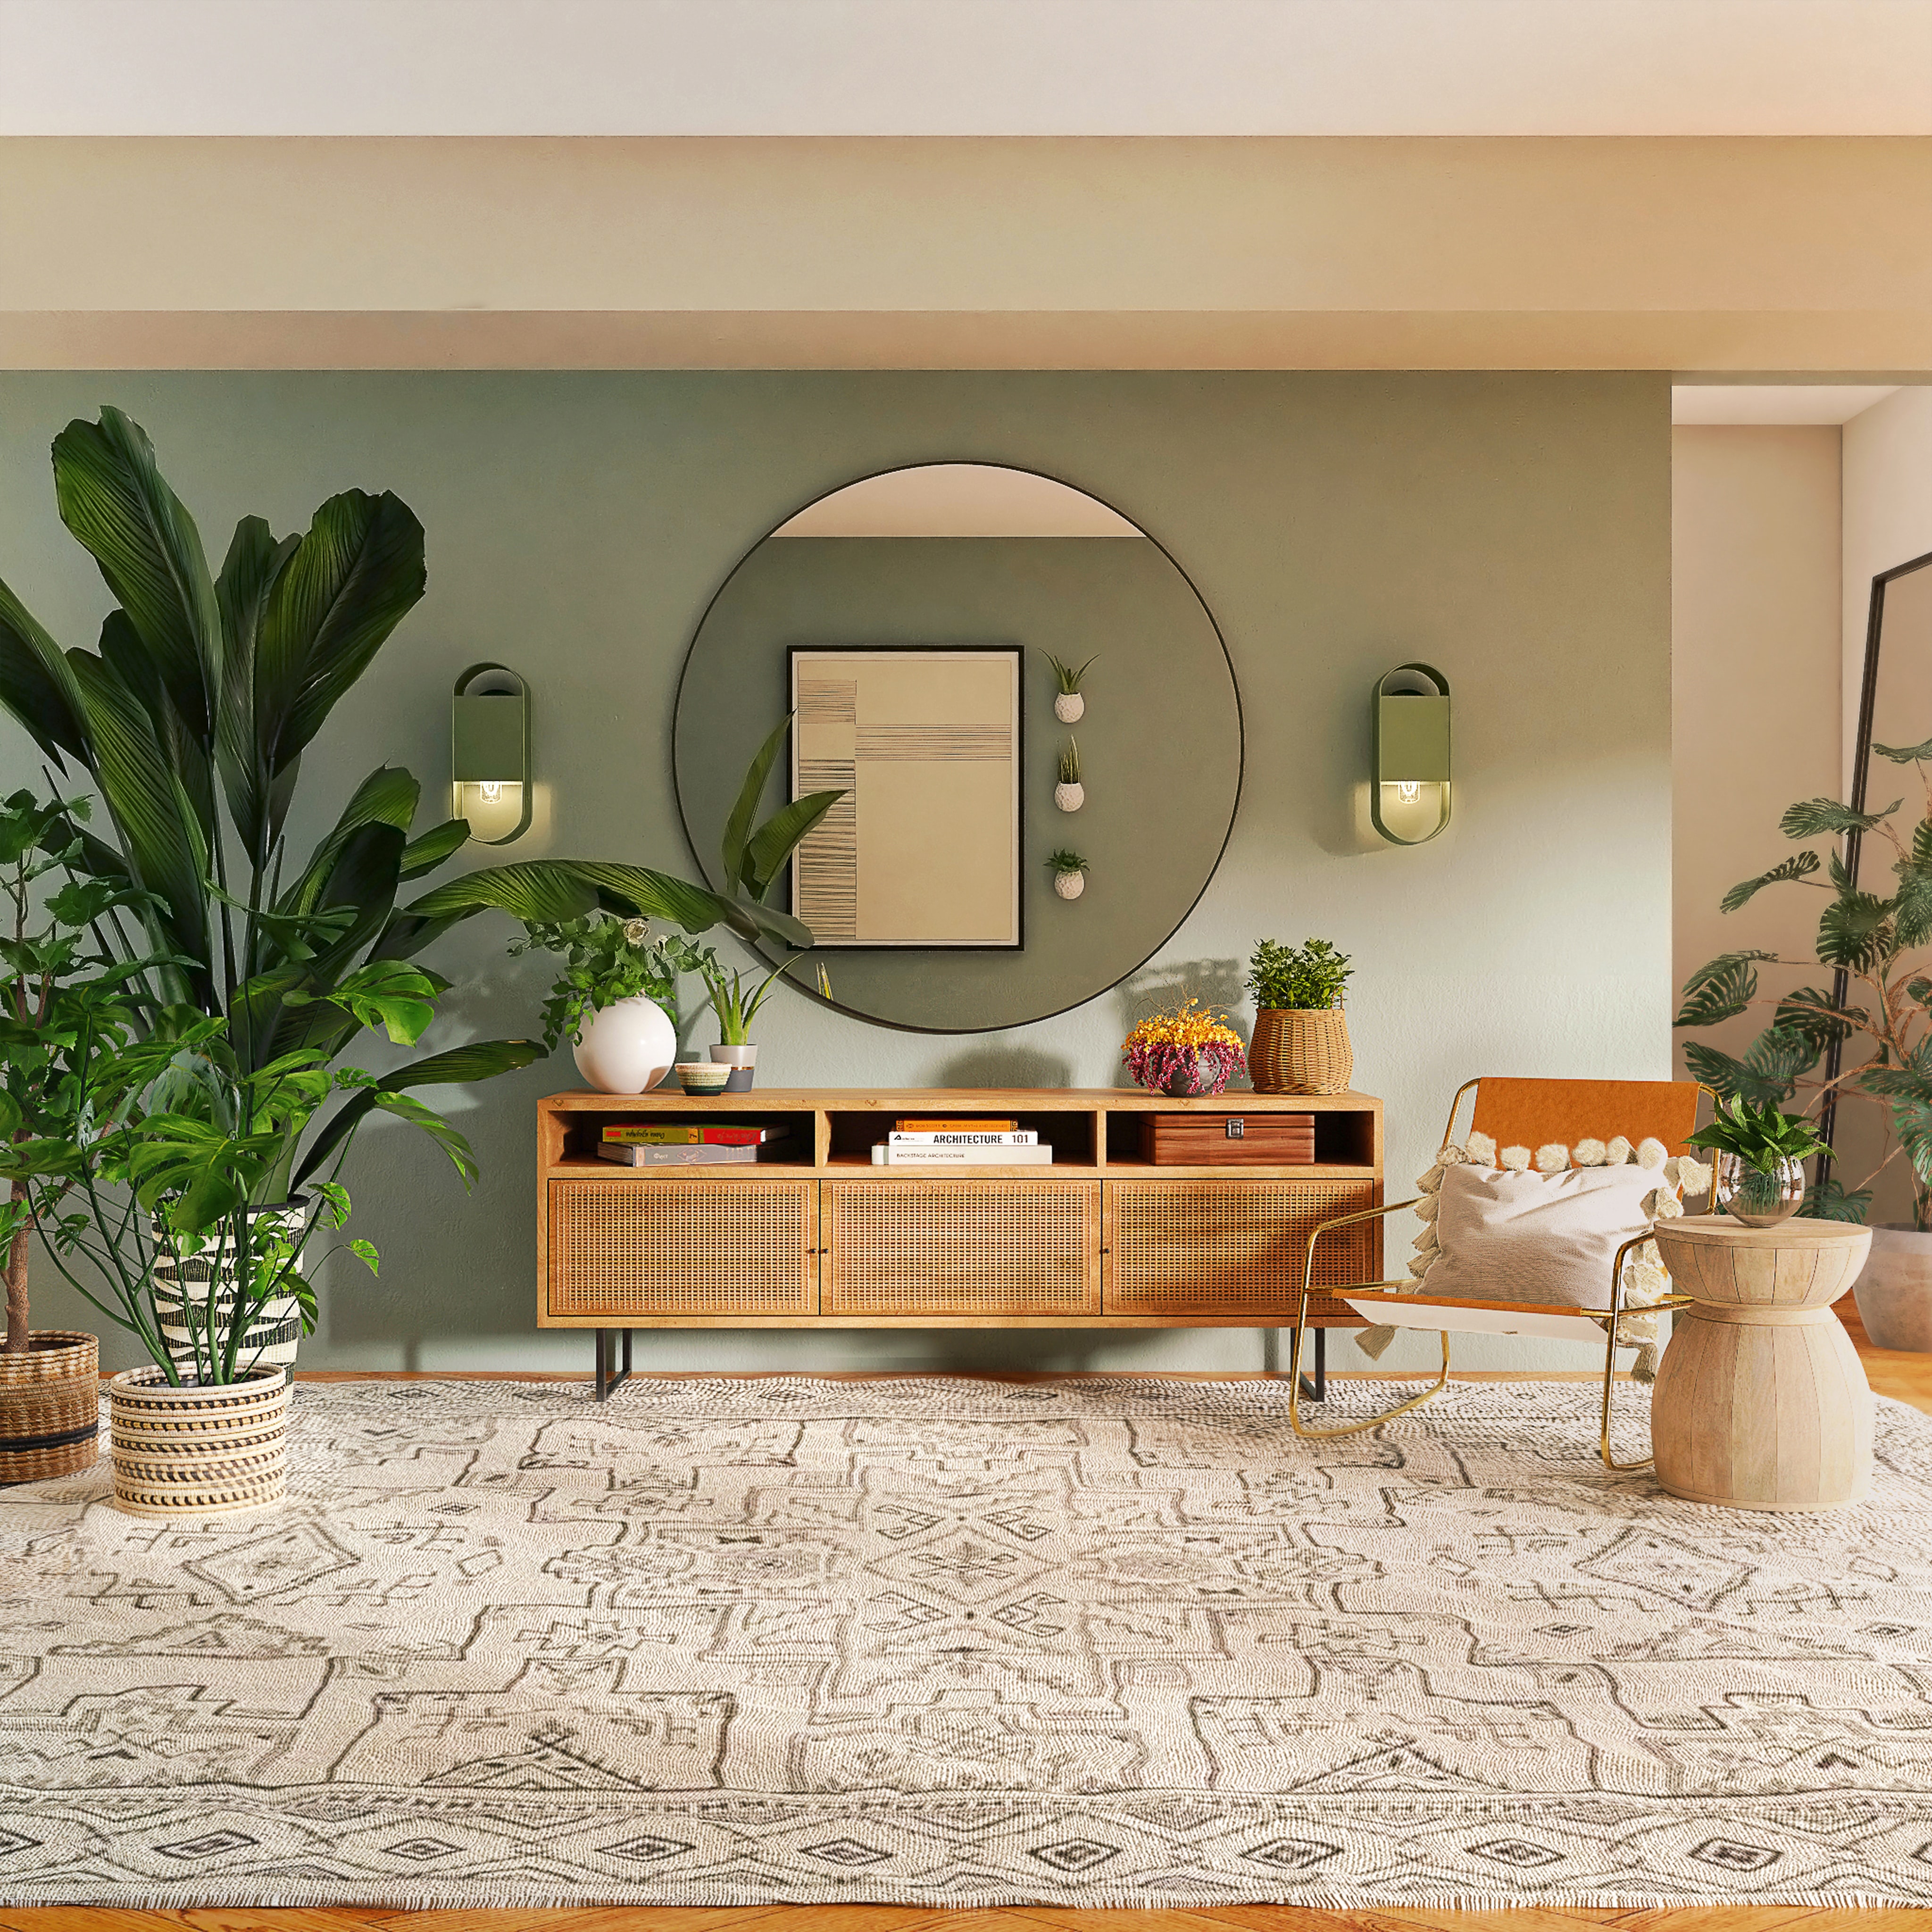 Home interior with a large plant, desk side table and large mirror